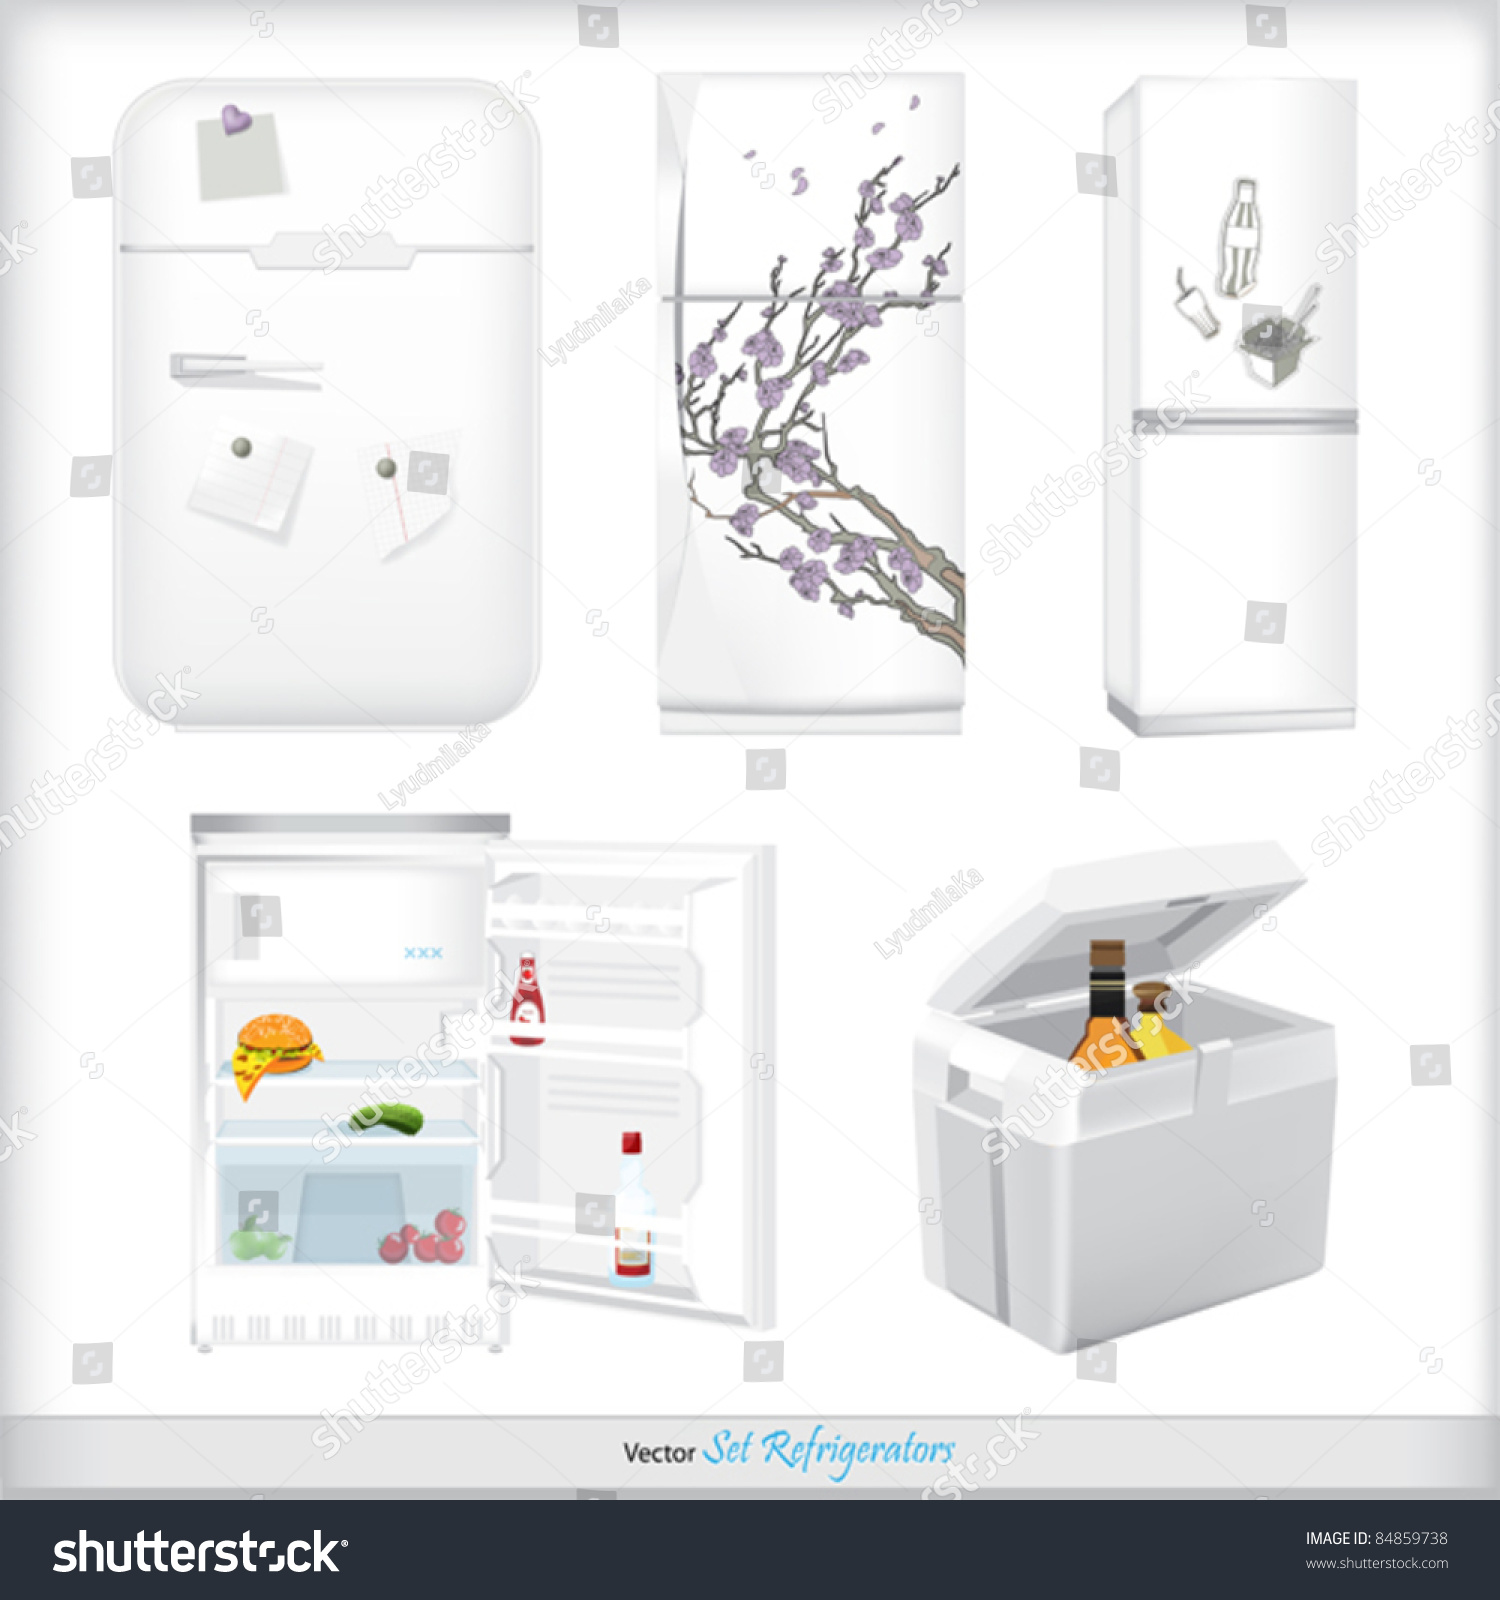 SVG of Set of refrigerators with labels and products svg